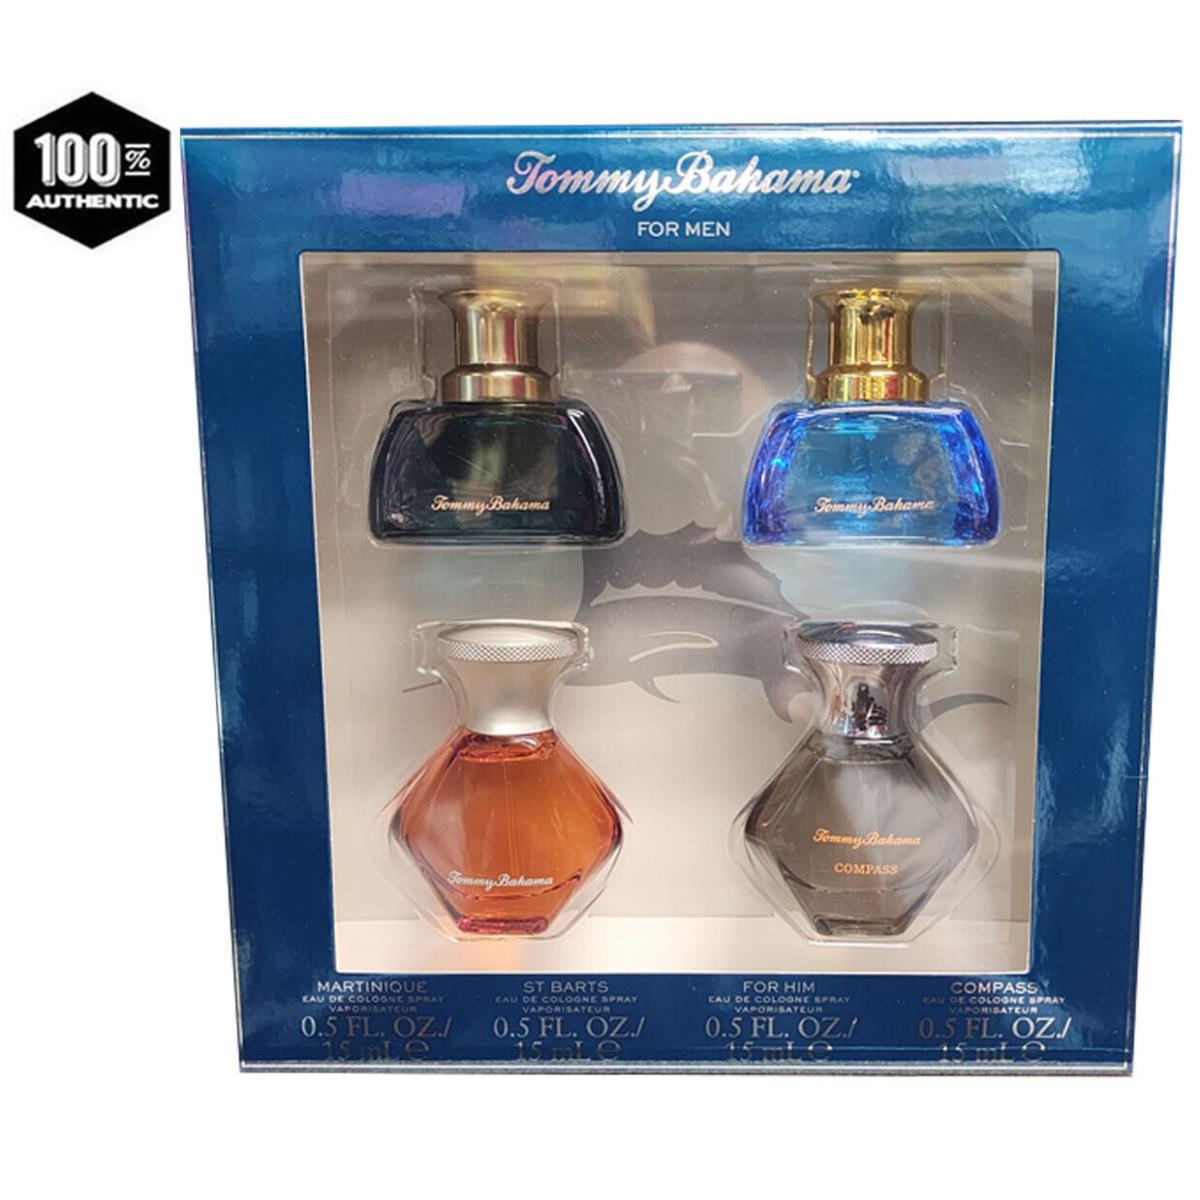 Tommy Bahama 0.5 oz 4pc Set For Men -martinique St.barts Compass For Him